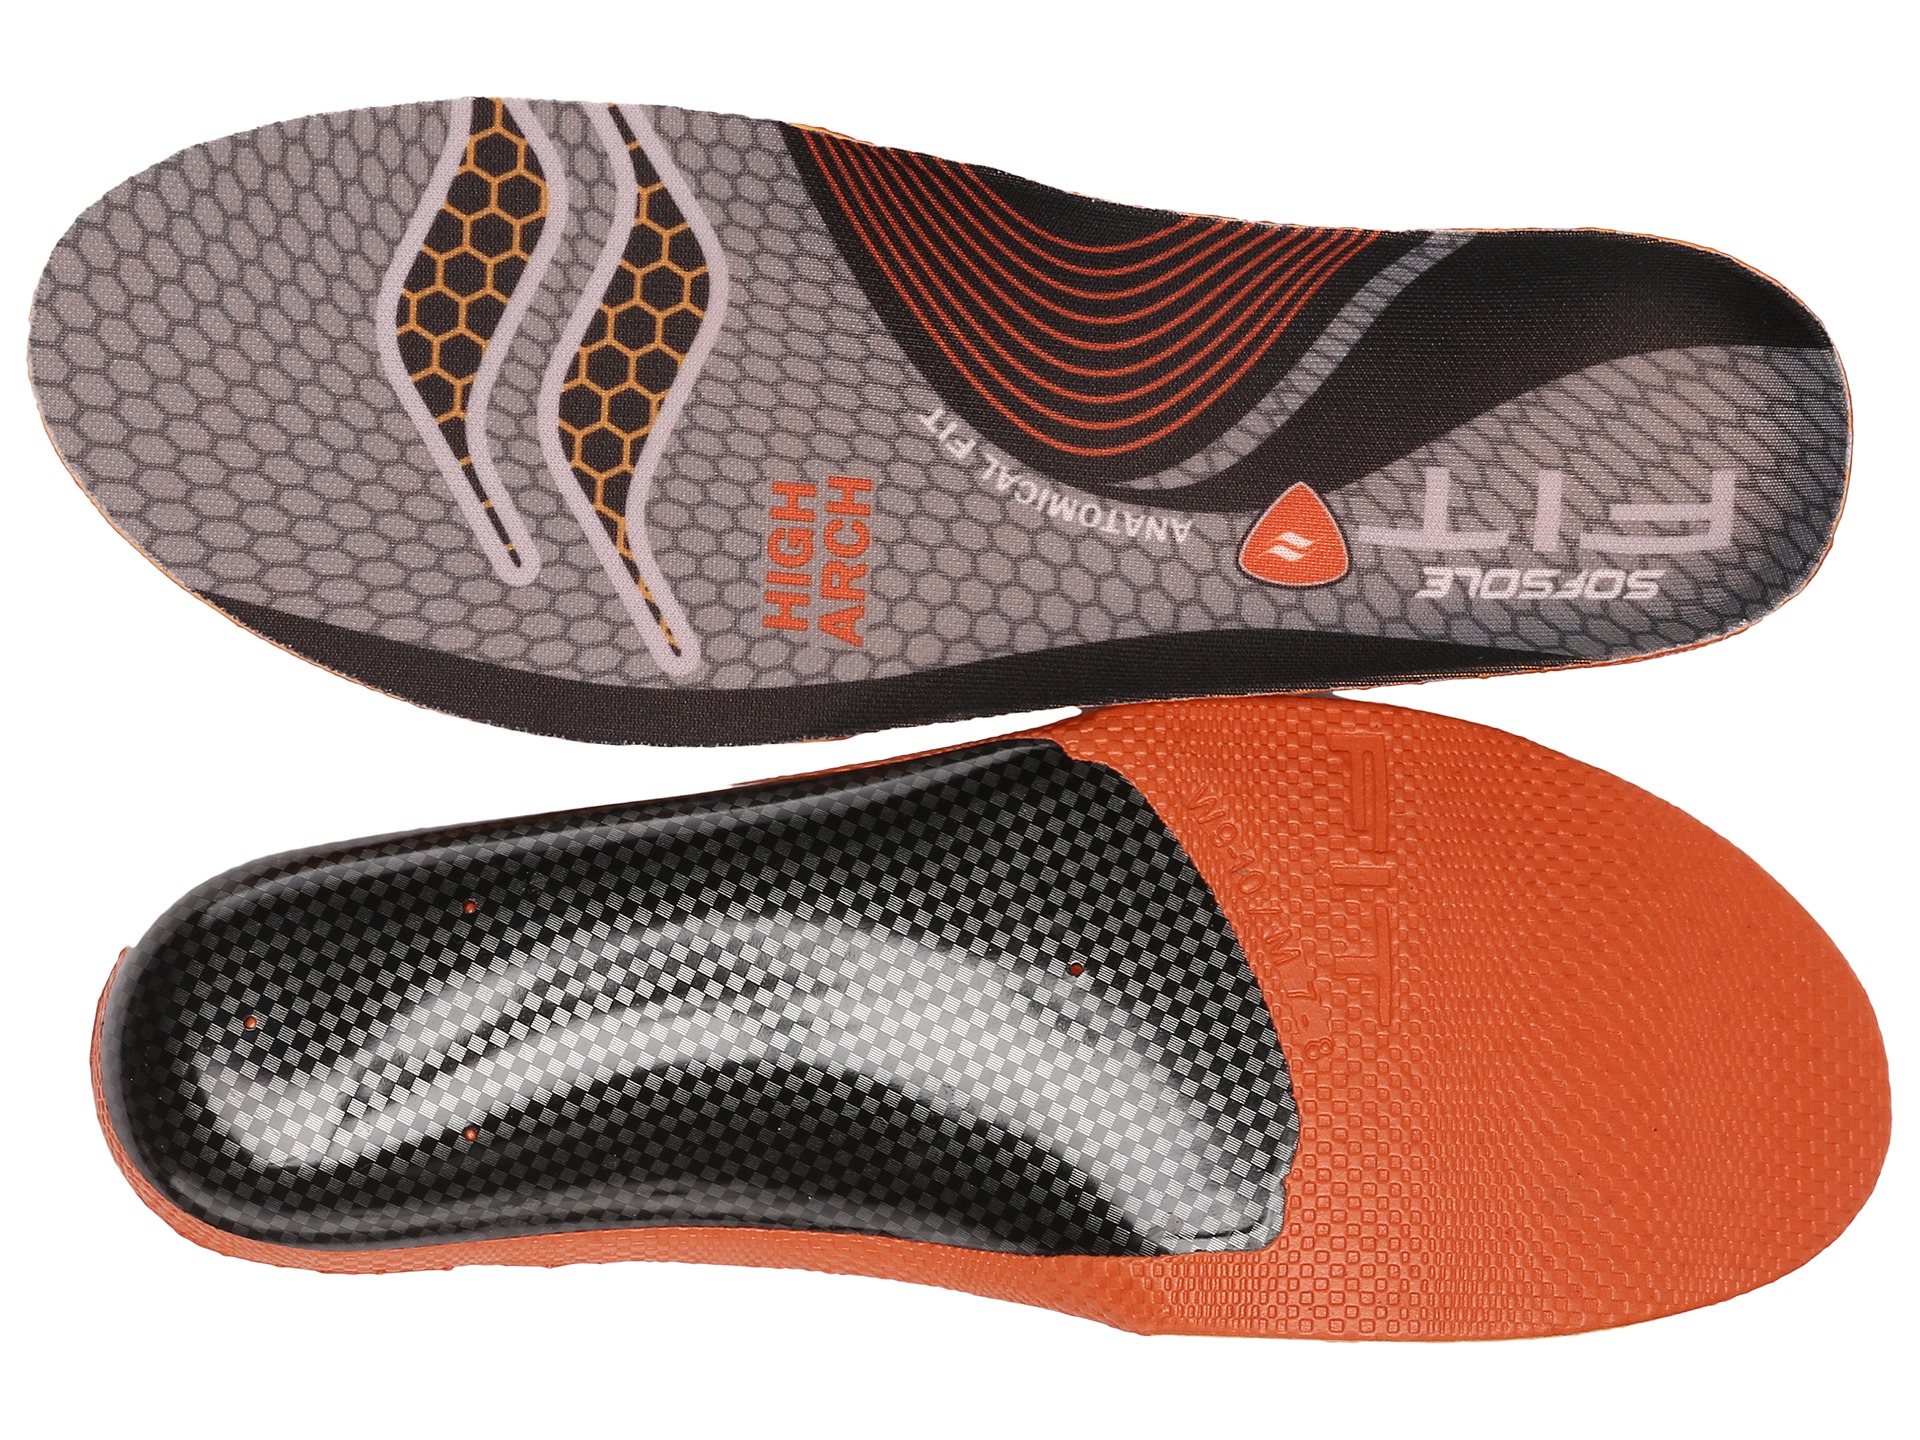 Sof Sole Fit Series High Arch Insole at